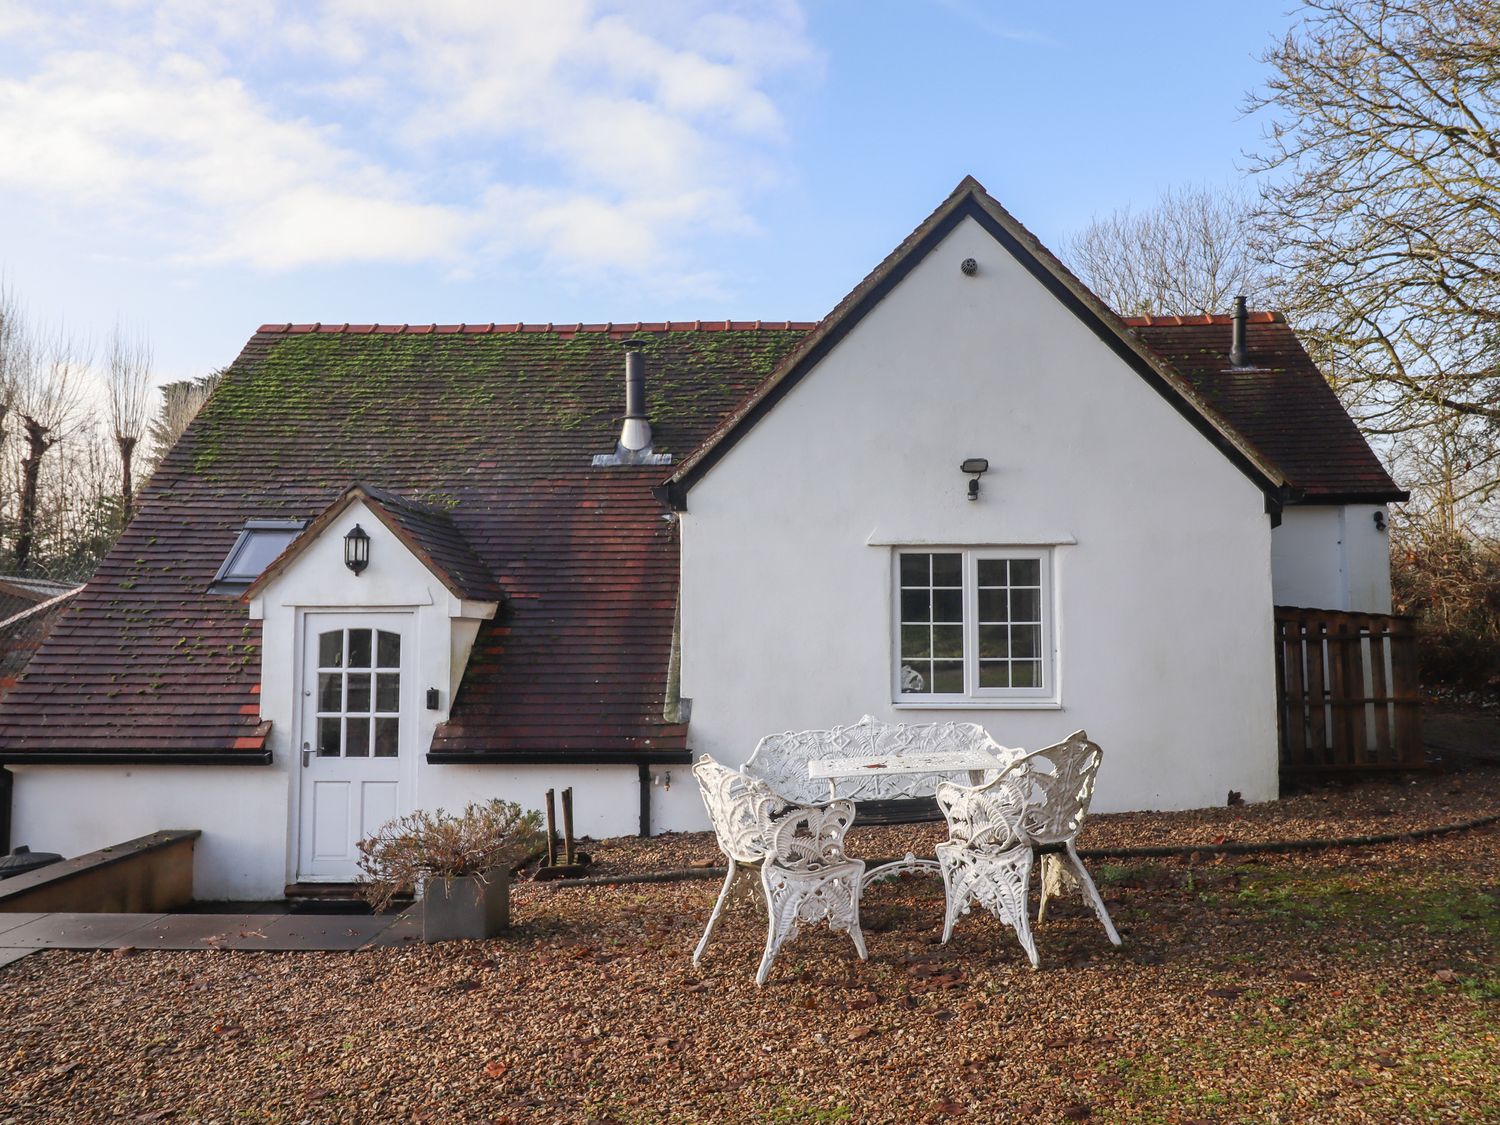 The Little White Cottage - Cotswolds - 1148286 - photo 1